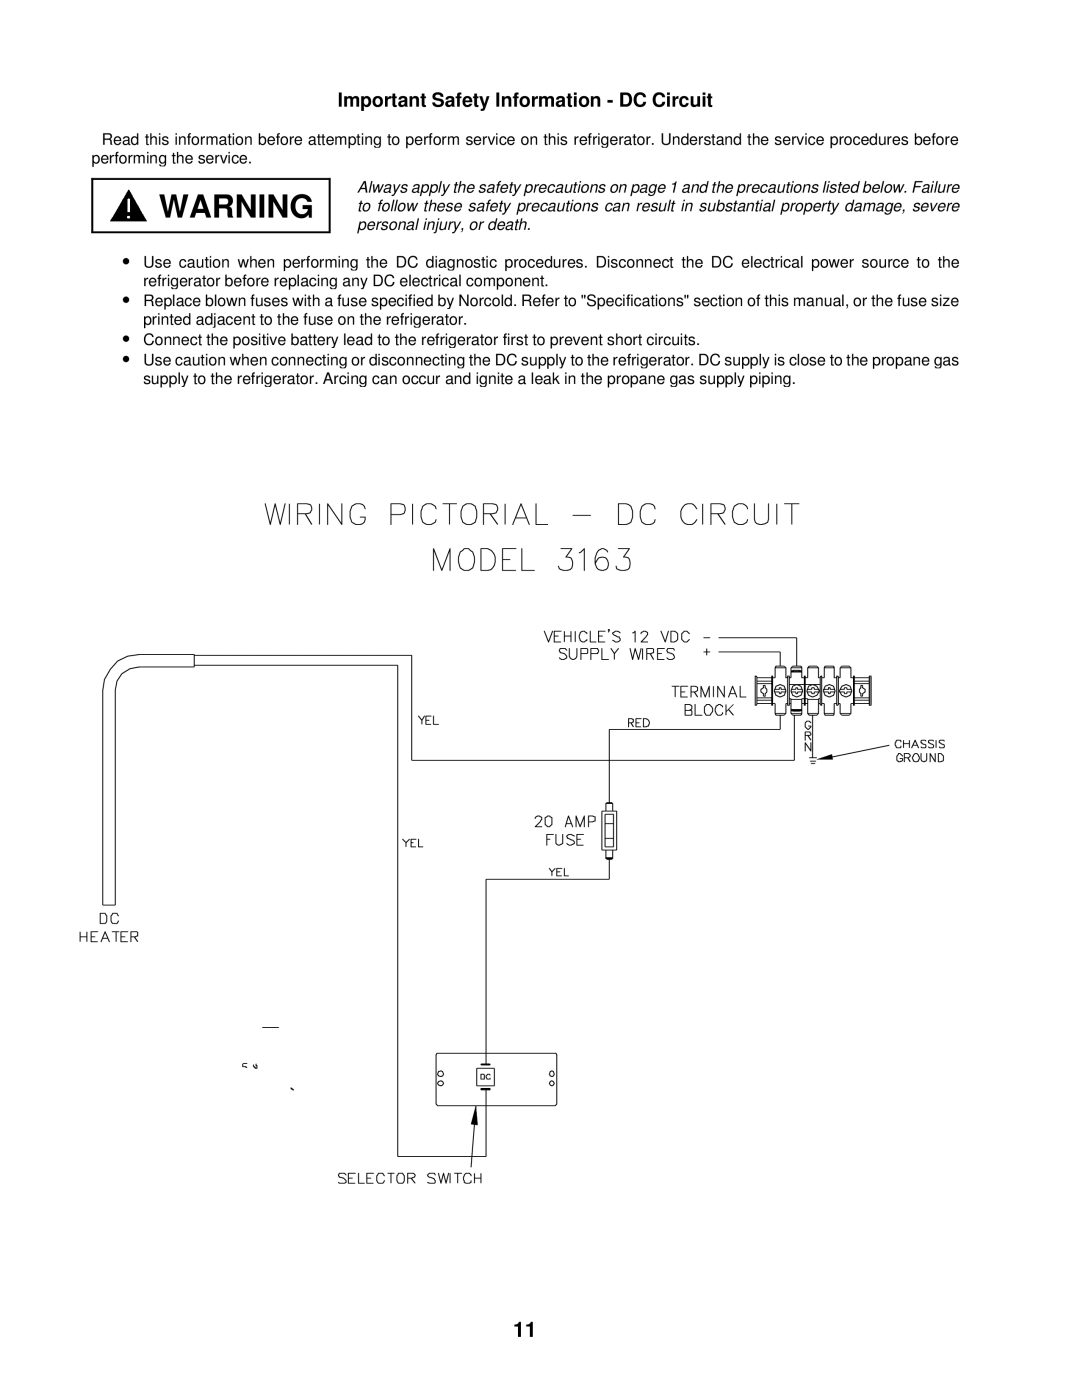 Bryant 3163 service manual Important Safety Information - DC Circuit 